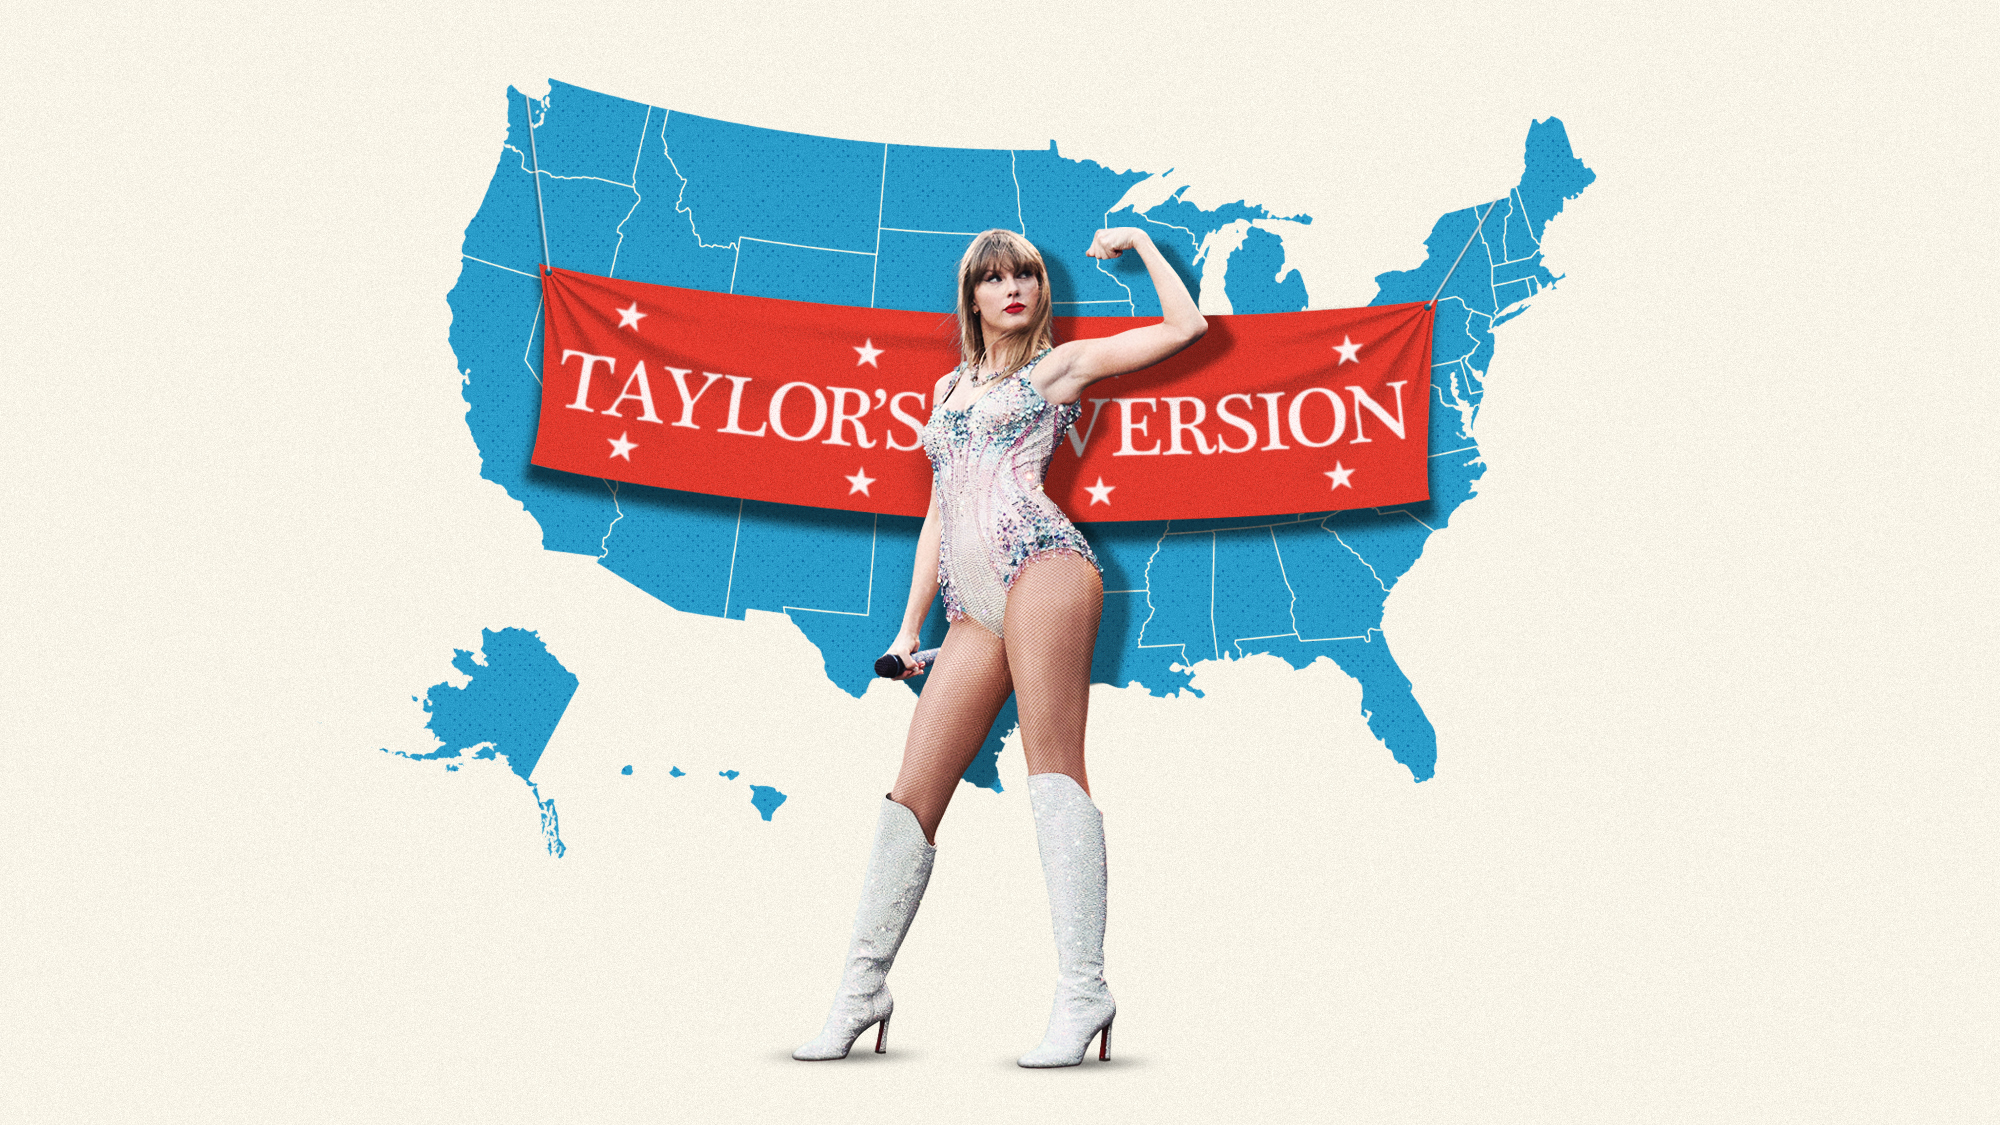 Could Taylor Swift swing the election?